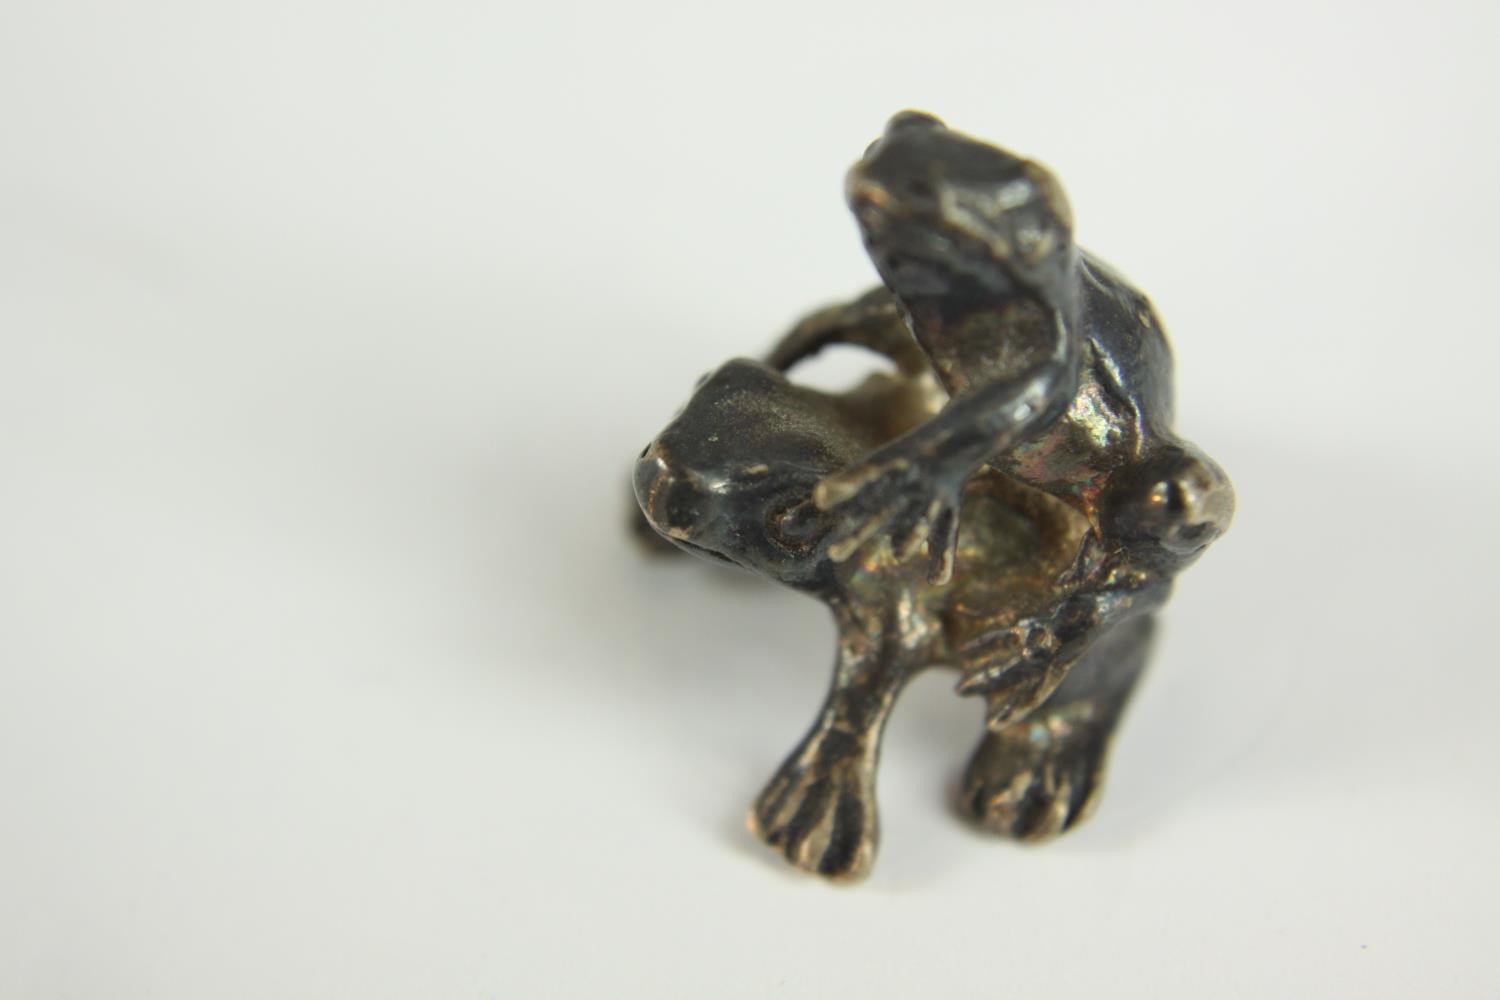 A pair of mating silver frogs along with a painted pewter frog on a rock. H.4cm. (largest) - Image 9 of 11